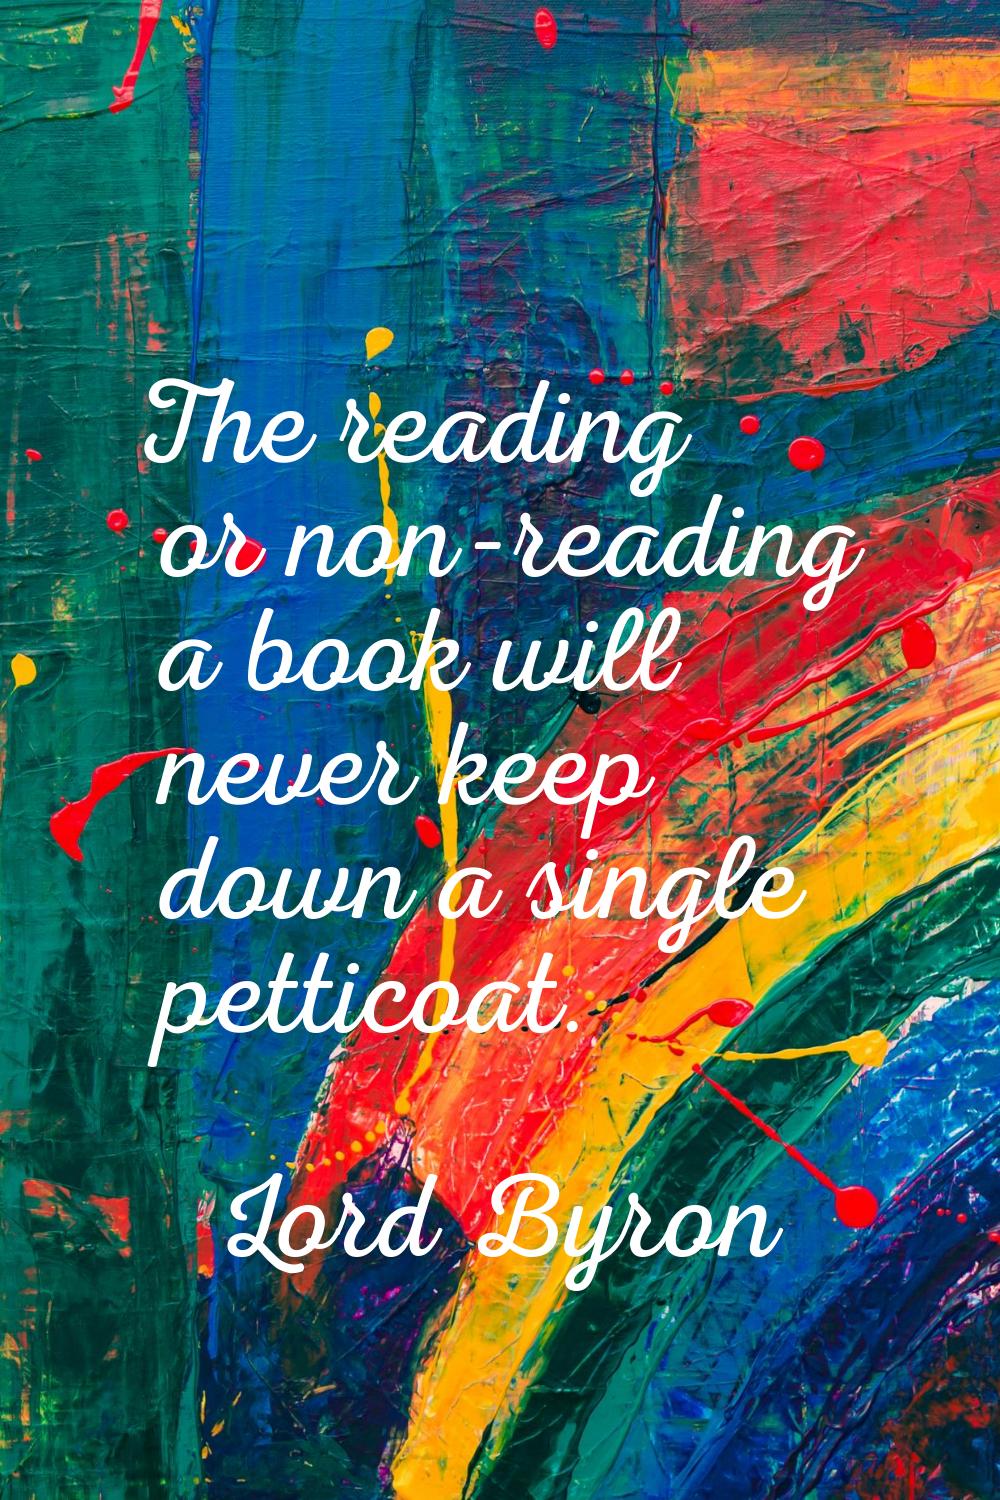 The reading or non-reading a book will never keep down a single petticoat.